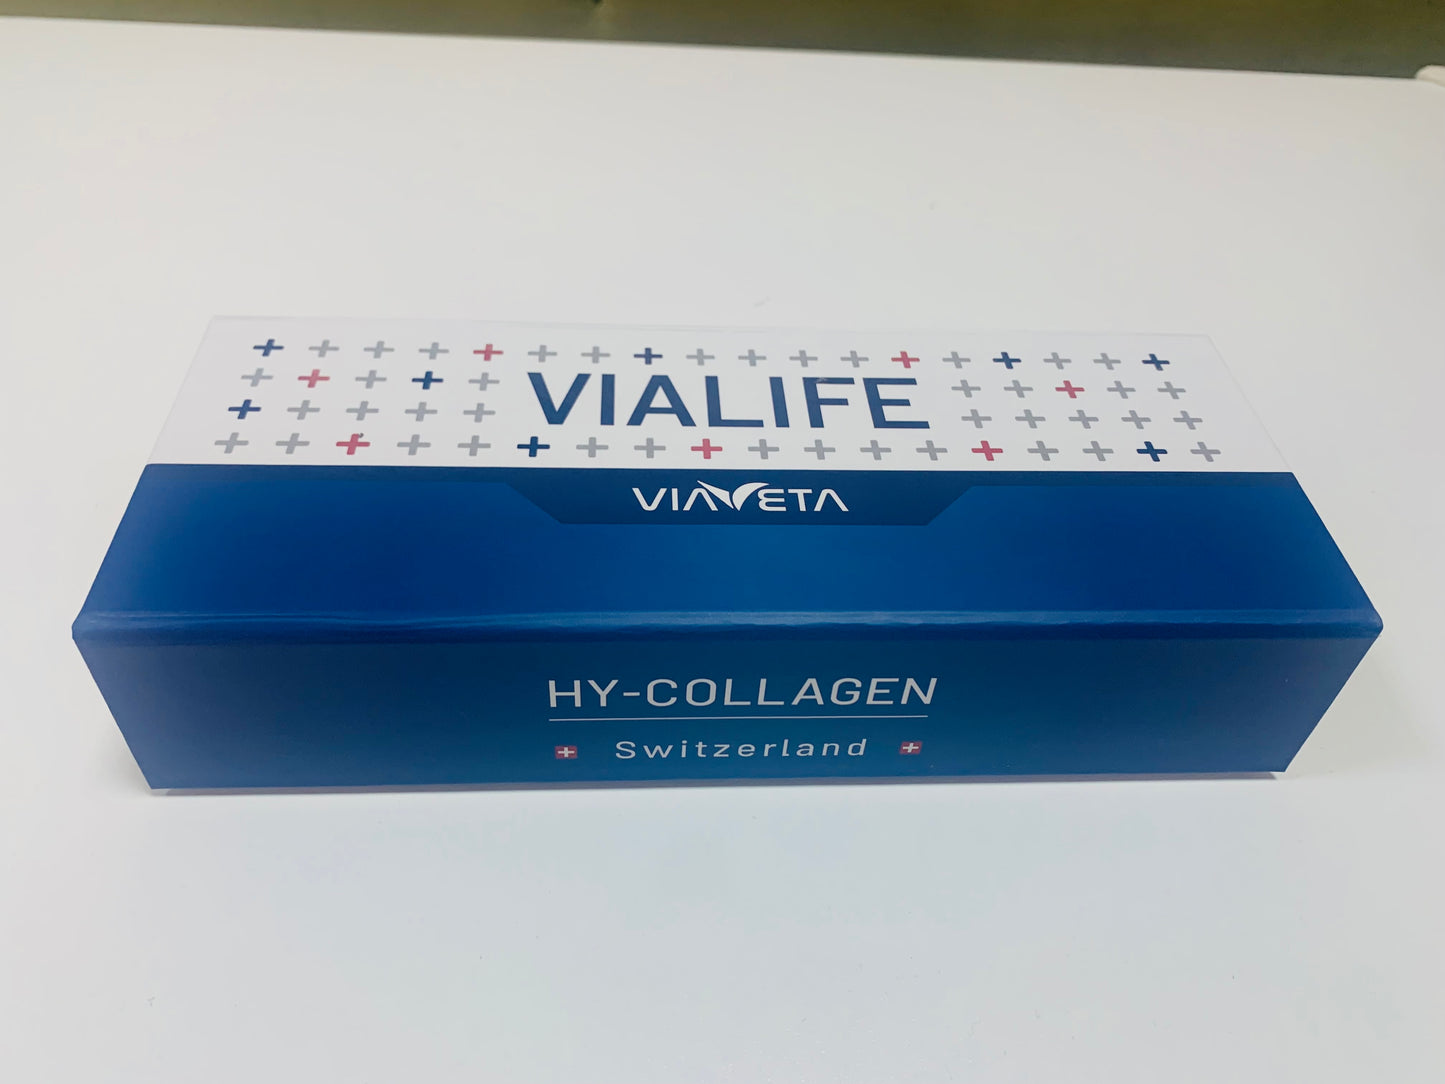 Hy-Collagen (Collagen Peptide, Collagen Powder, Fish Collagen), Beauty Booster for Healthy Skin, Hair & Joints (30 day's usage package, once daily)